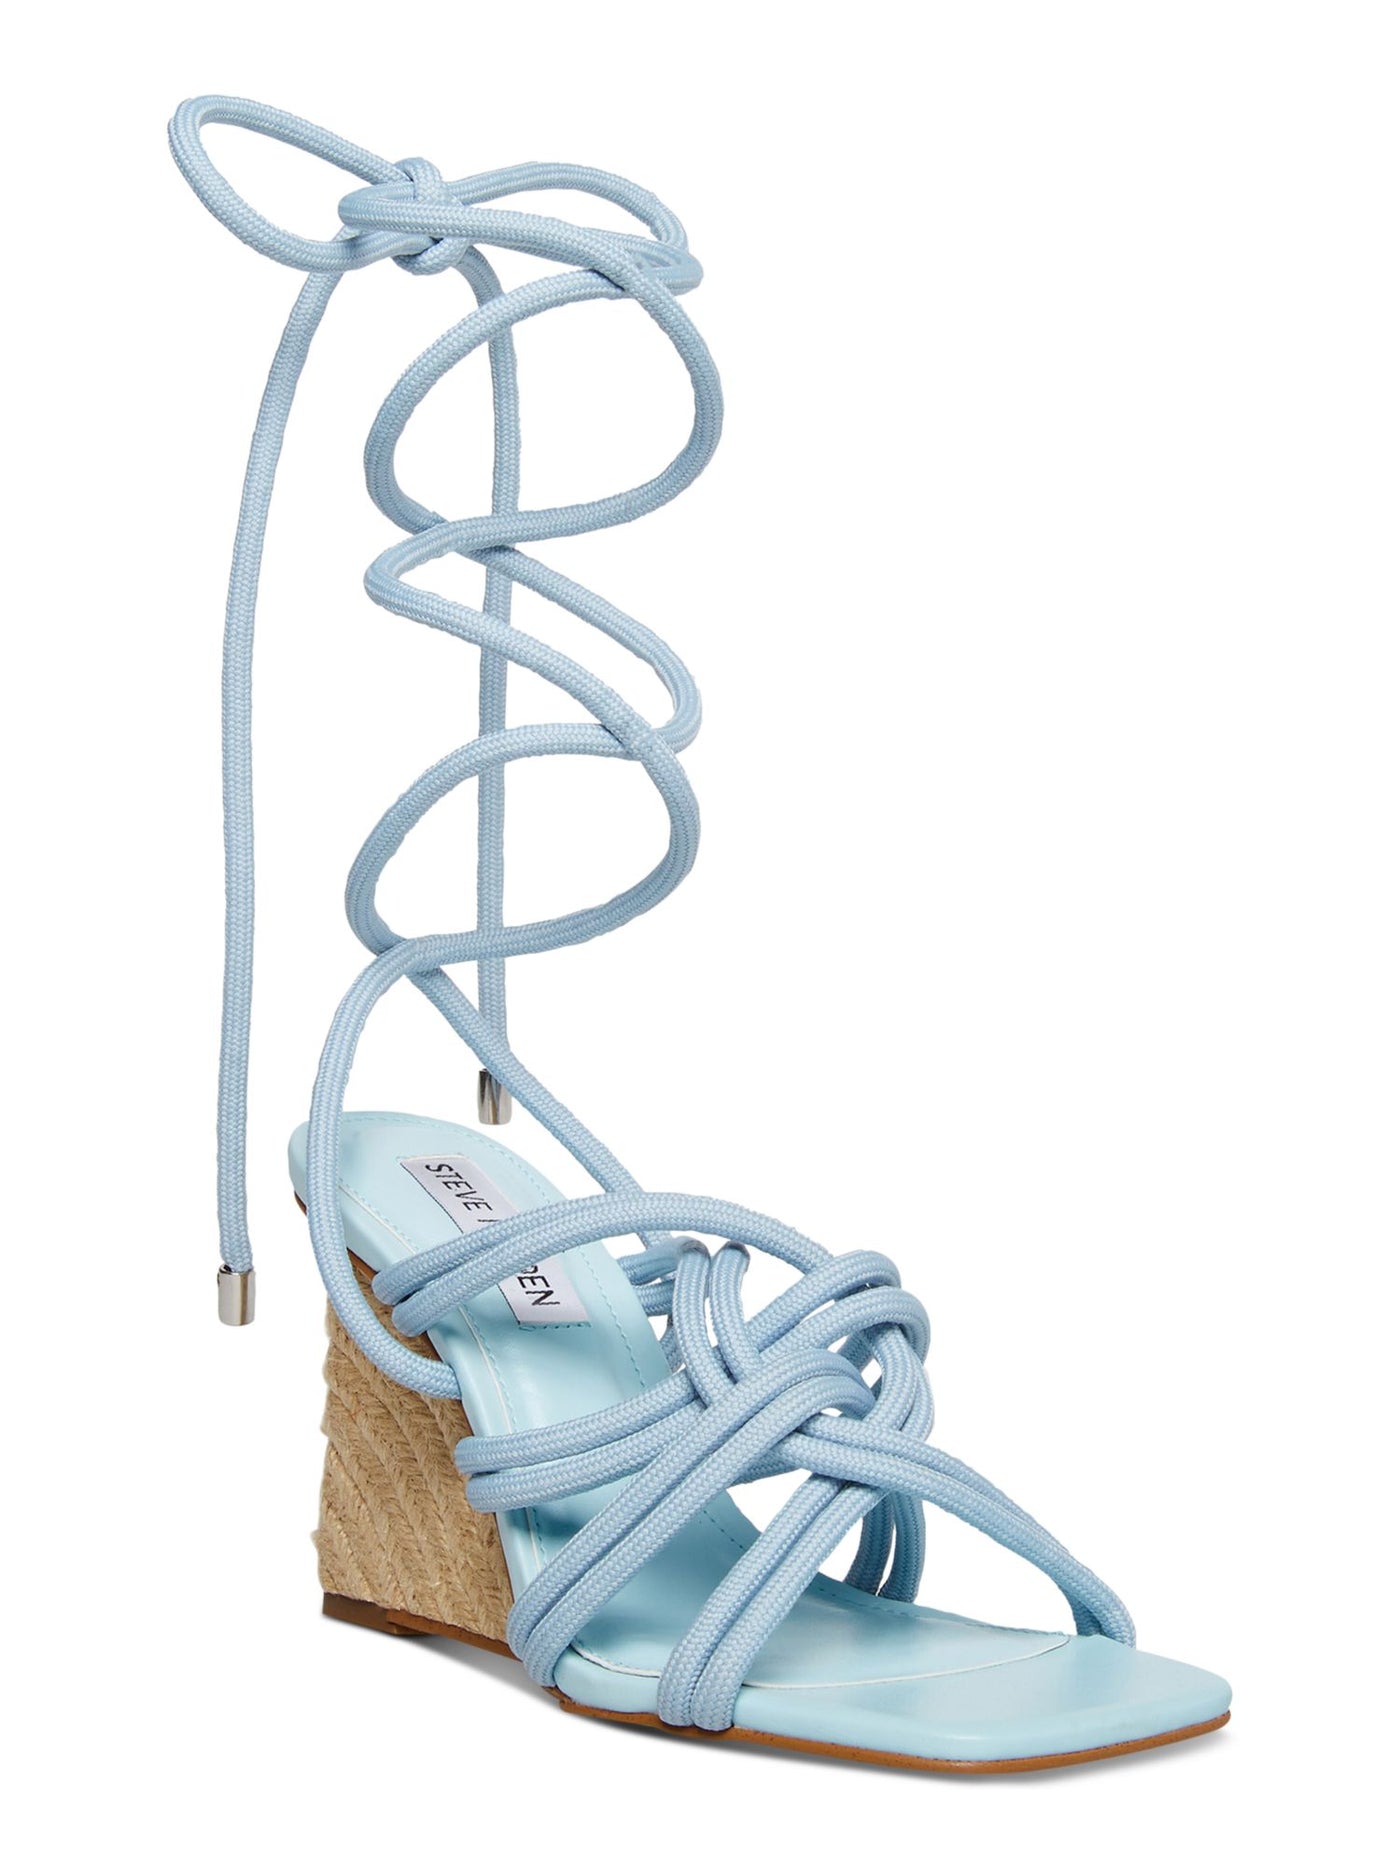 STEVE MADDEN Womens Light Blue Padded Strappy Idolized Square Toe Wedge Lace-Up Dress Espadrille Shoes 6.5 M